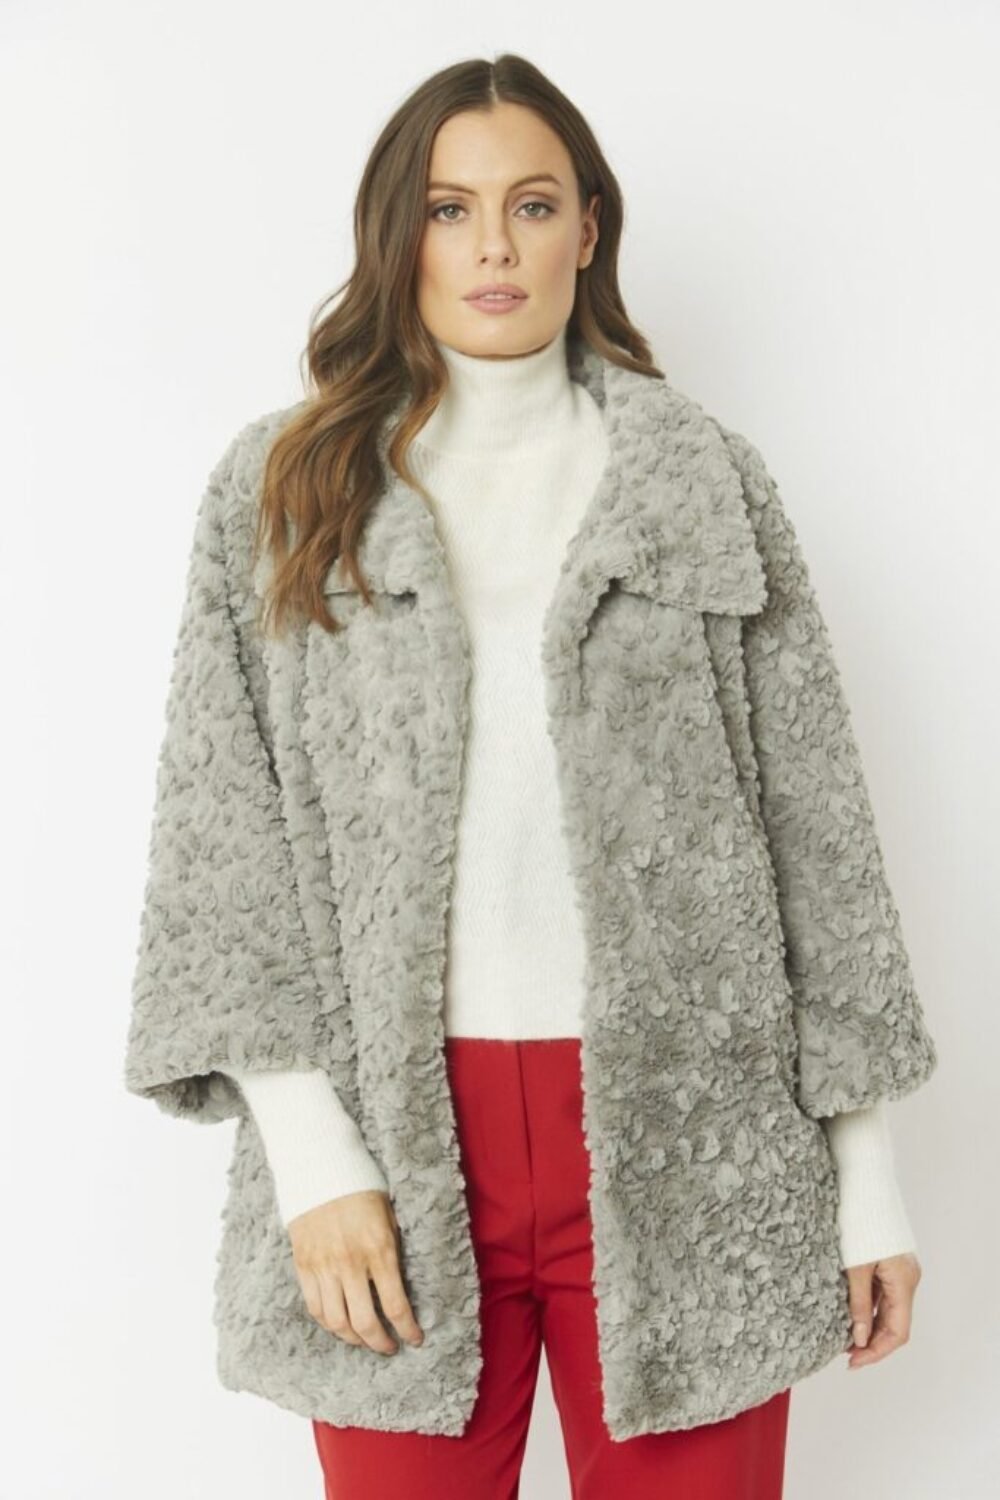 Shop Lux Grey Faux Fur Teddy Coat and women's luxury and designer clothes at www.lux-apparel.co.uk